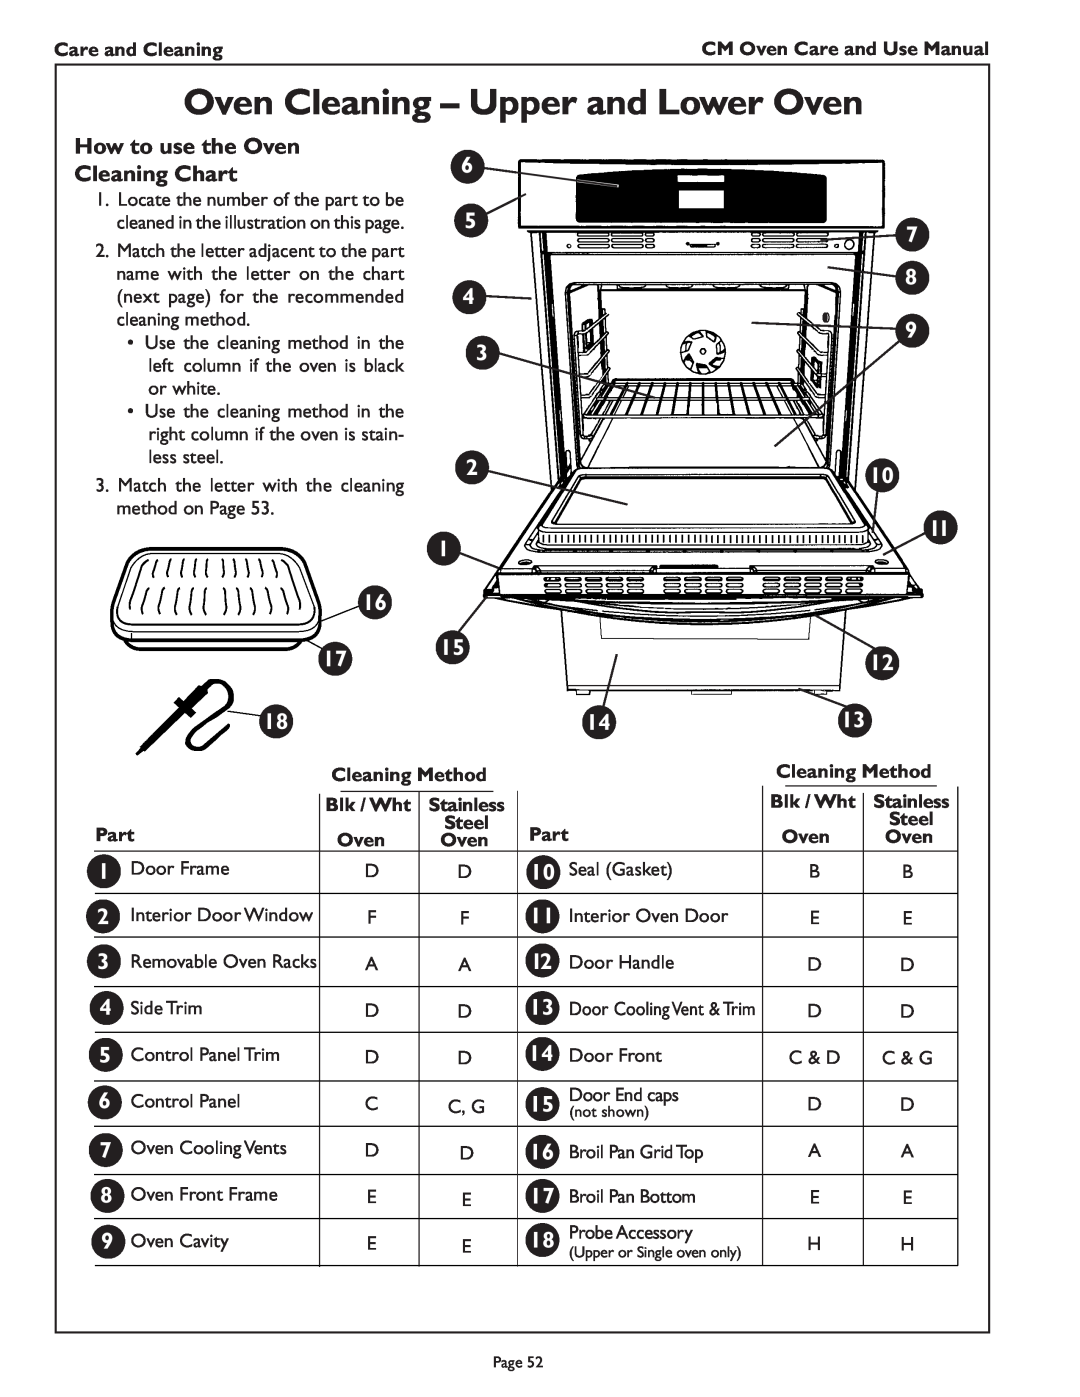 Thermador CM302 manual Oven Cleaning - Upper and Lower Oven, How to use the Oven Cleaning Chart 